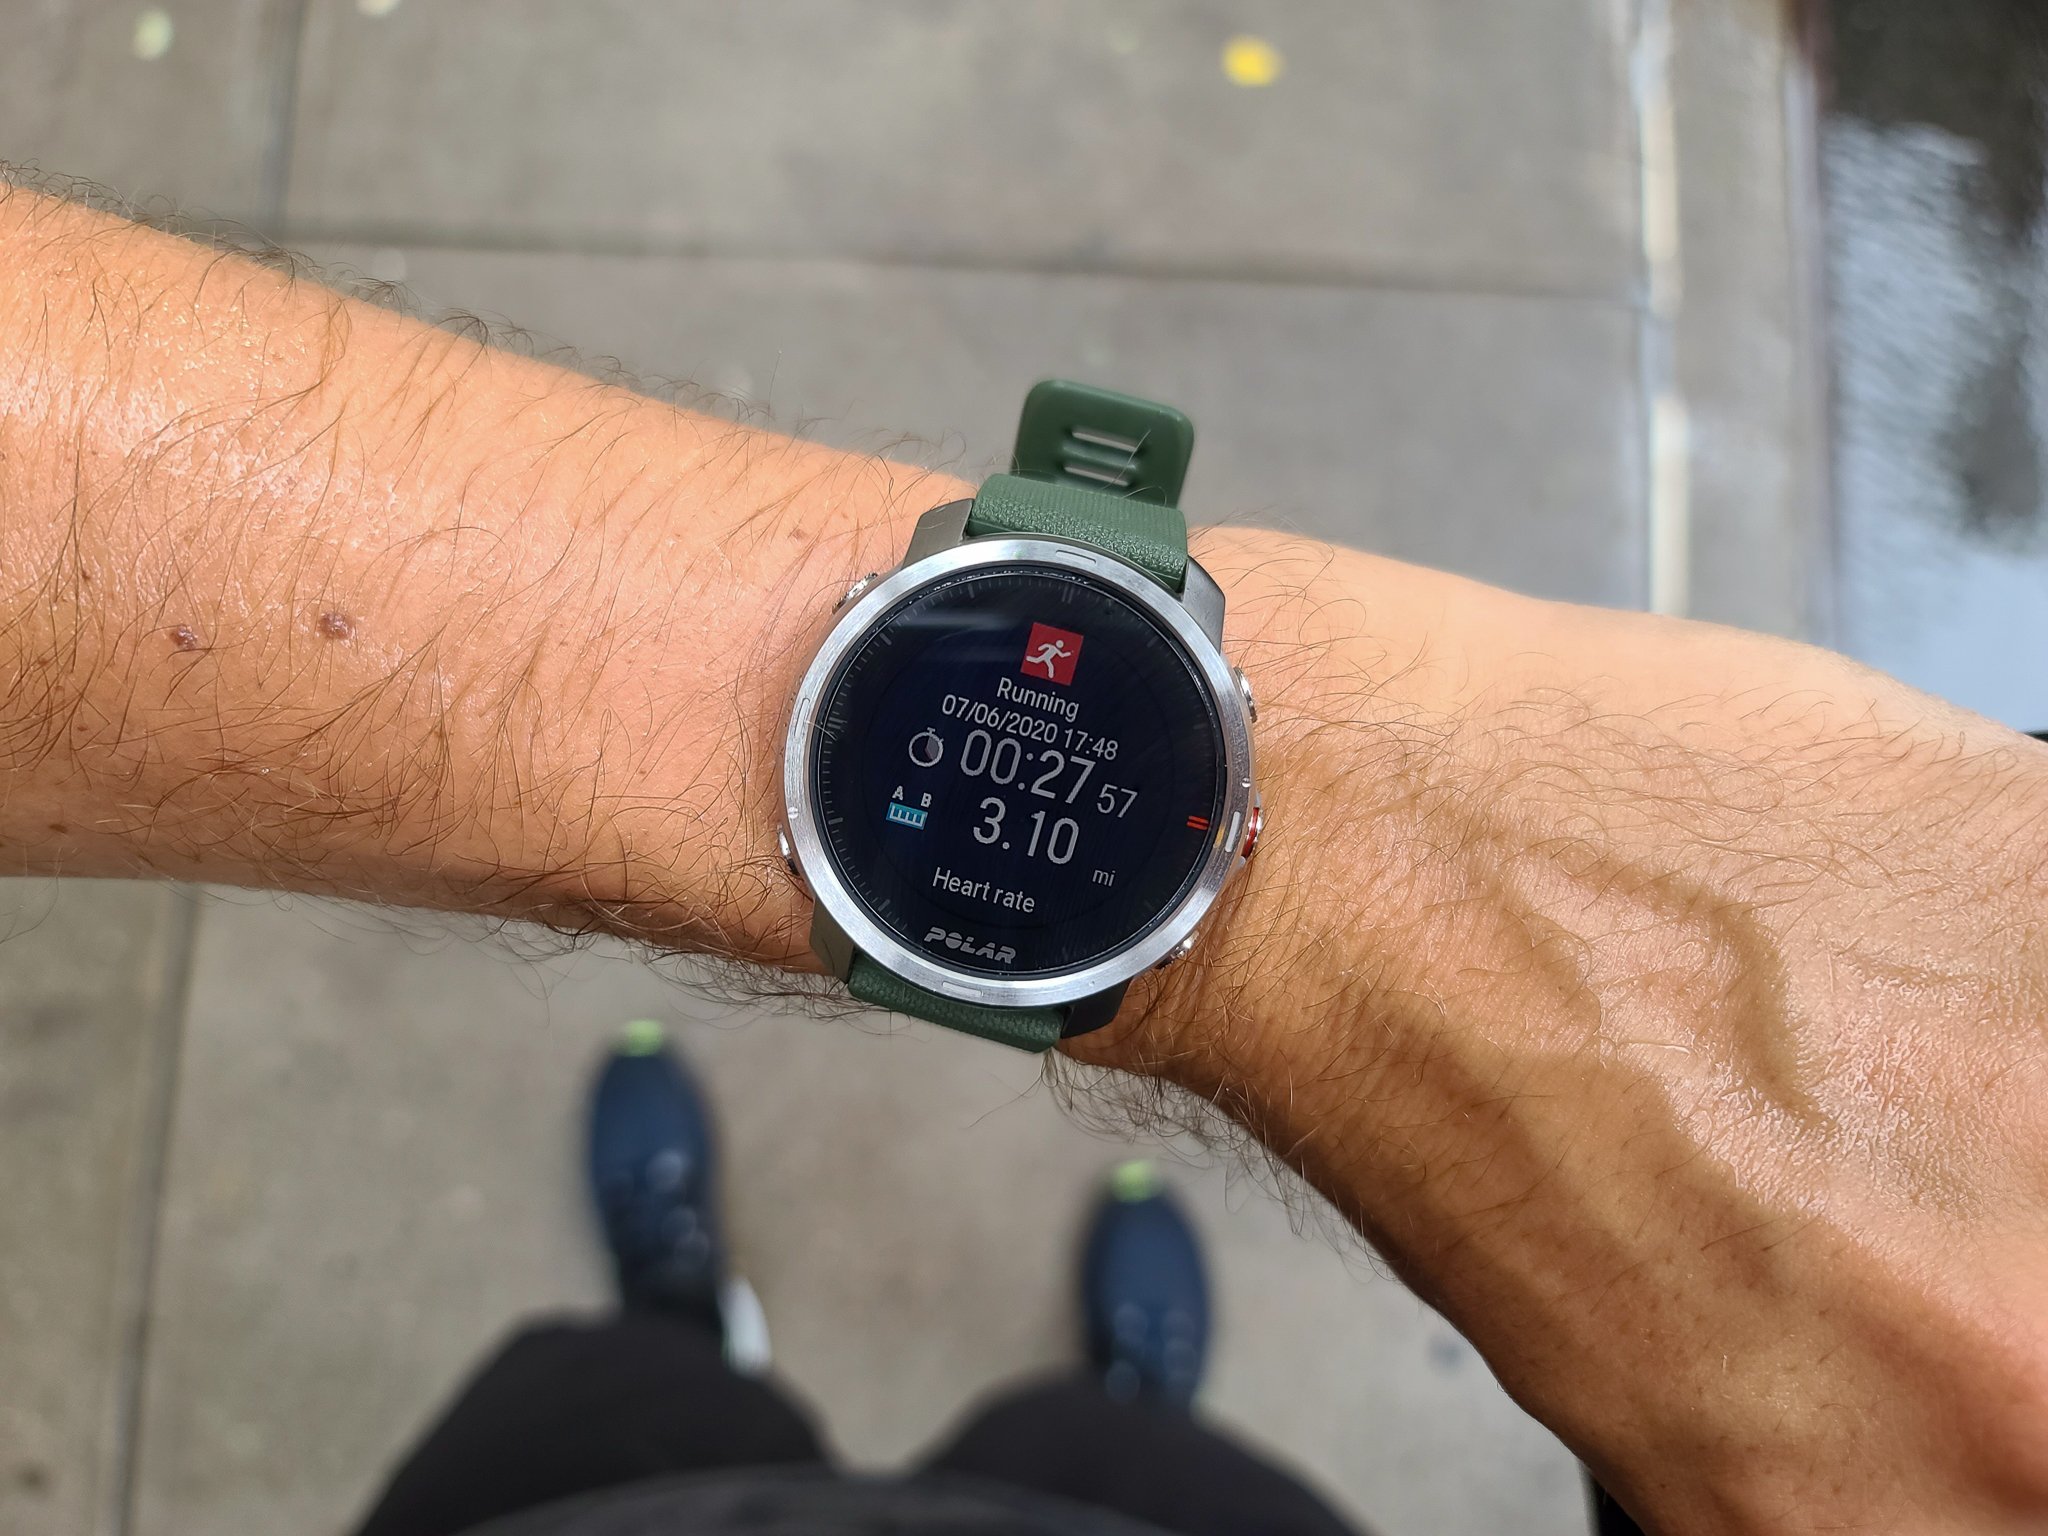 Polar Grit X review: The Grit is great - Android Authority